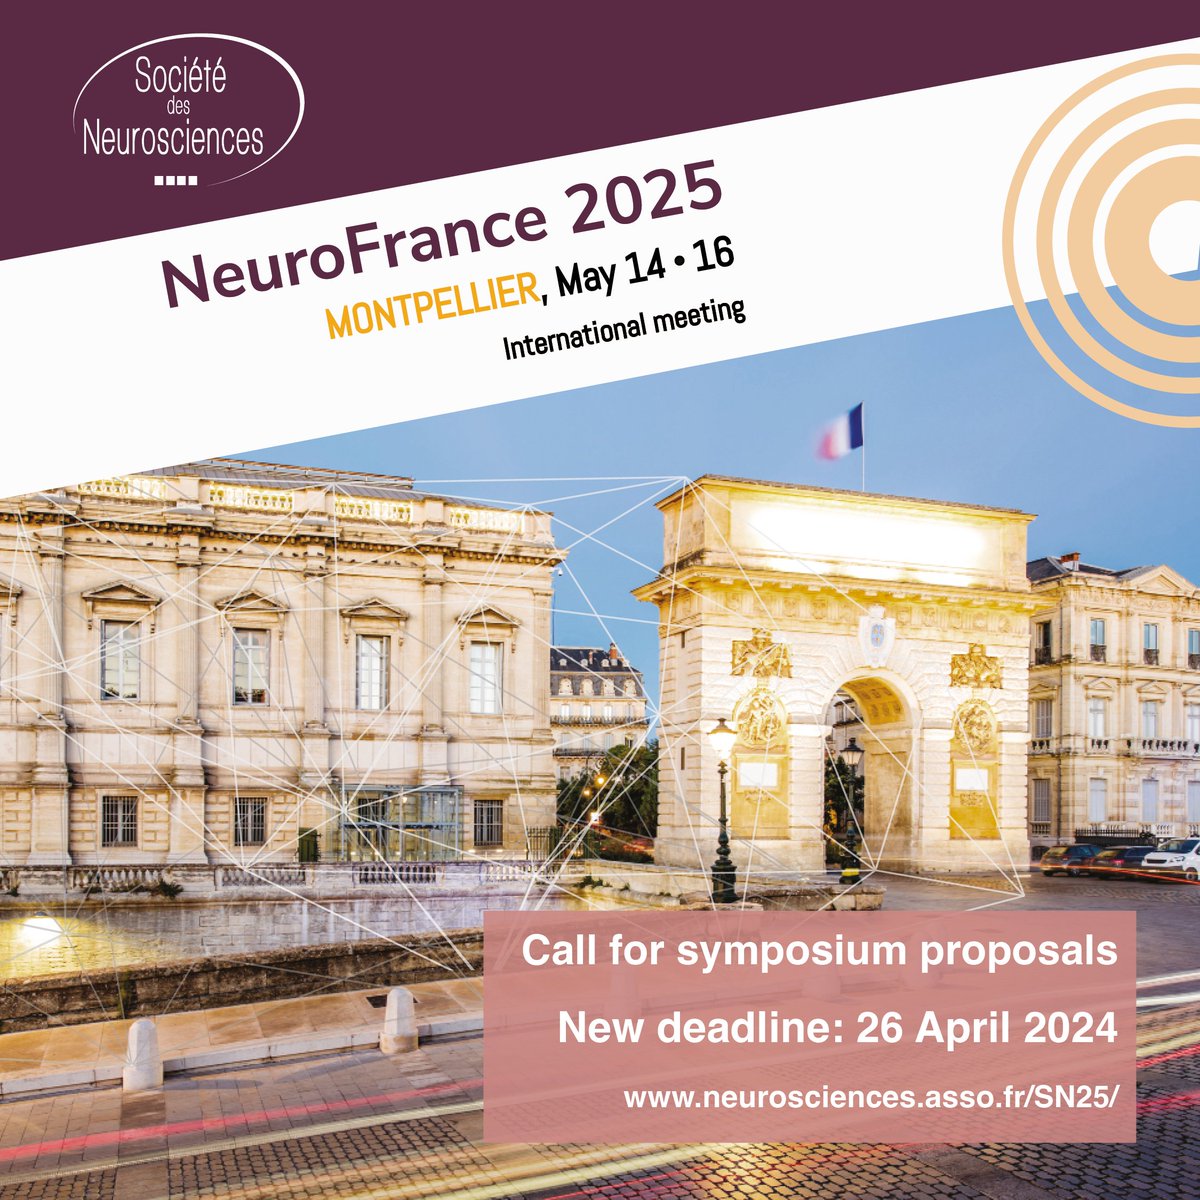 Need more time to submit a symposium proposal for #NeuroFrance2025 ? 🔴Deadline postponed to 26 April. Last chance to present your research at the largest neuroscience meeting in France! More info & submission: neurosciences.asso.fr/SN25